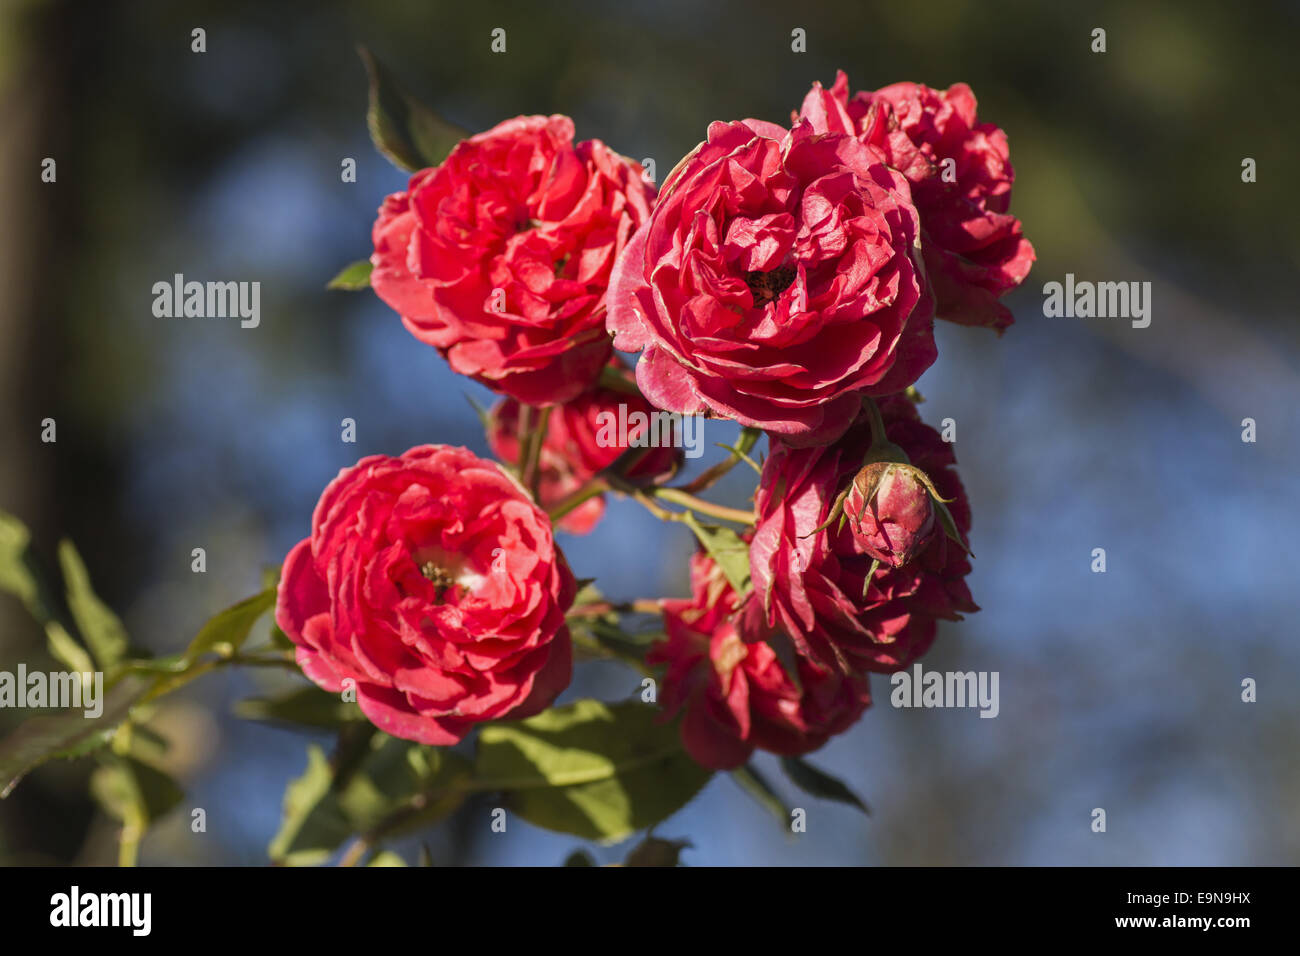 Red gardenrose in january - caducity Stock Photo